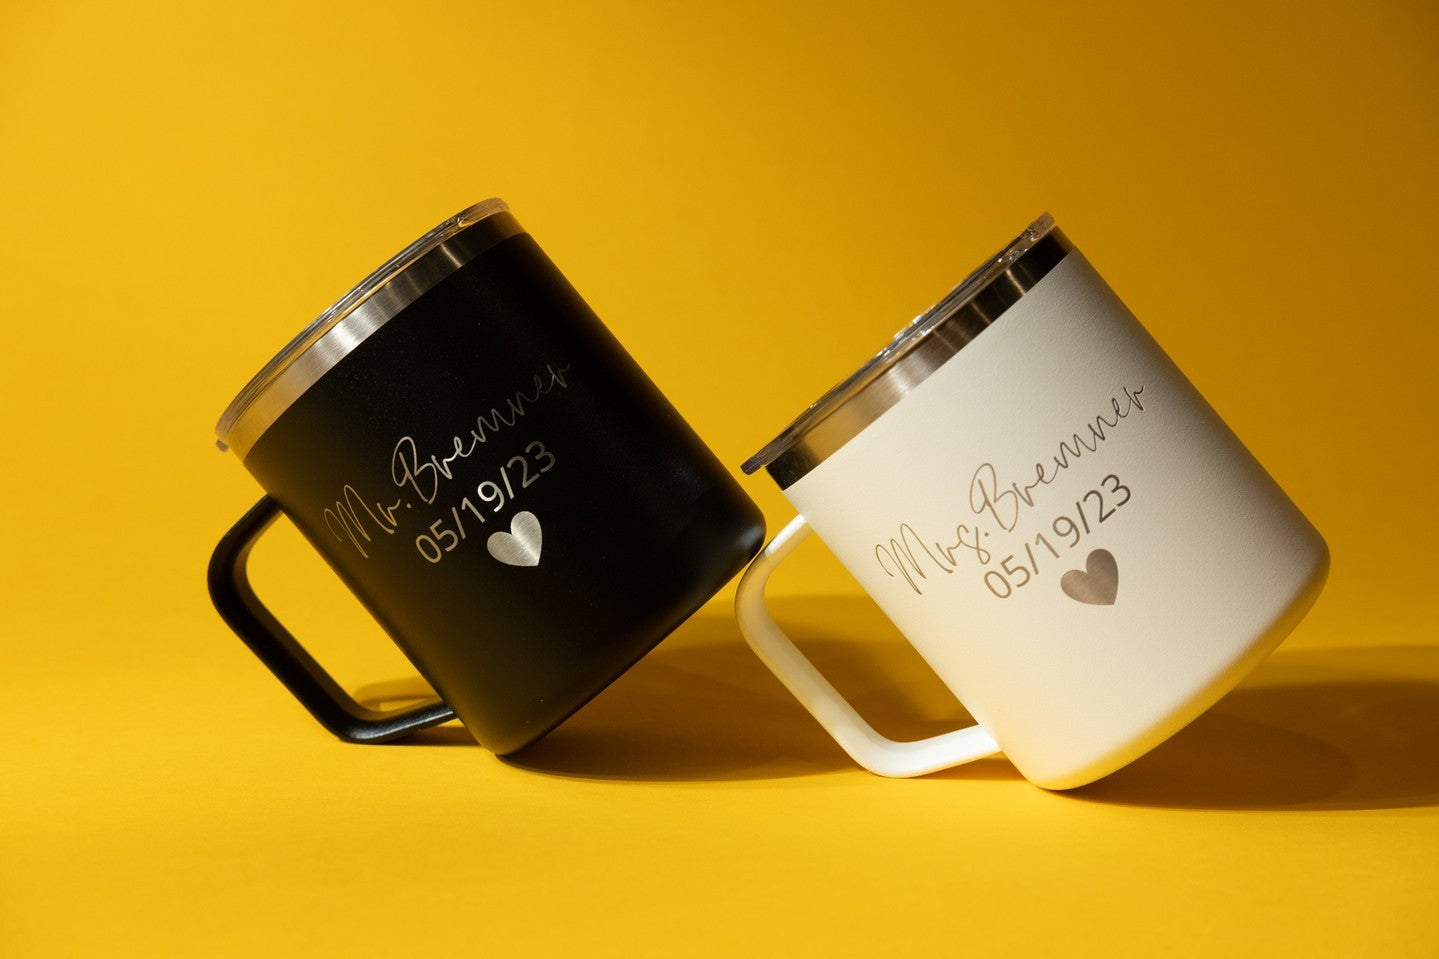 The Perfect Gift: Why Mr. and Mrs. Customized Mugs are the Ultimate Present